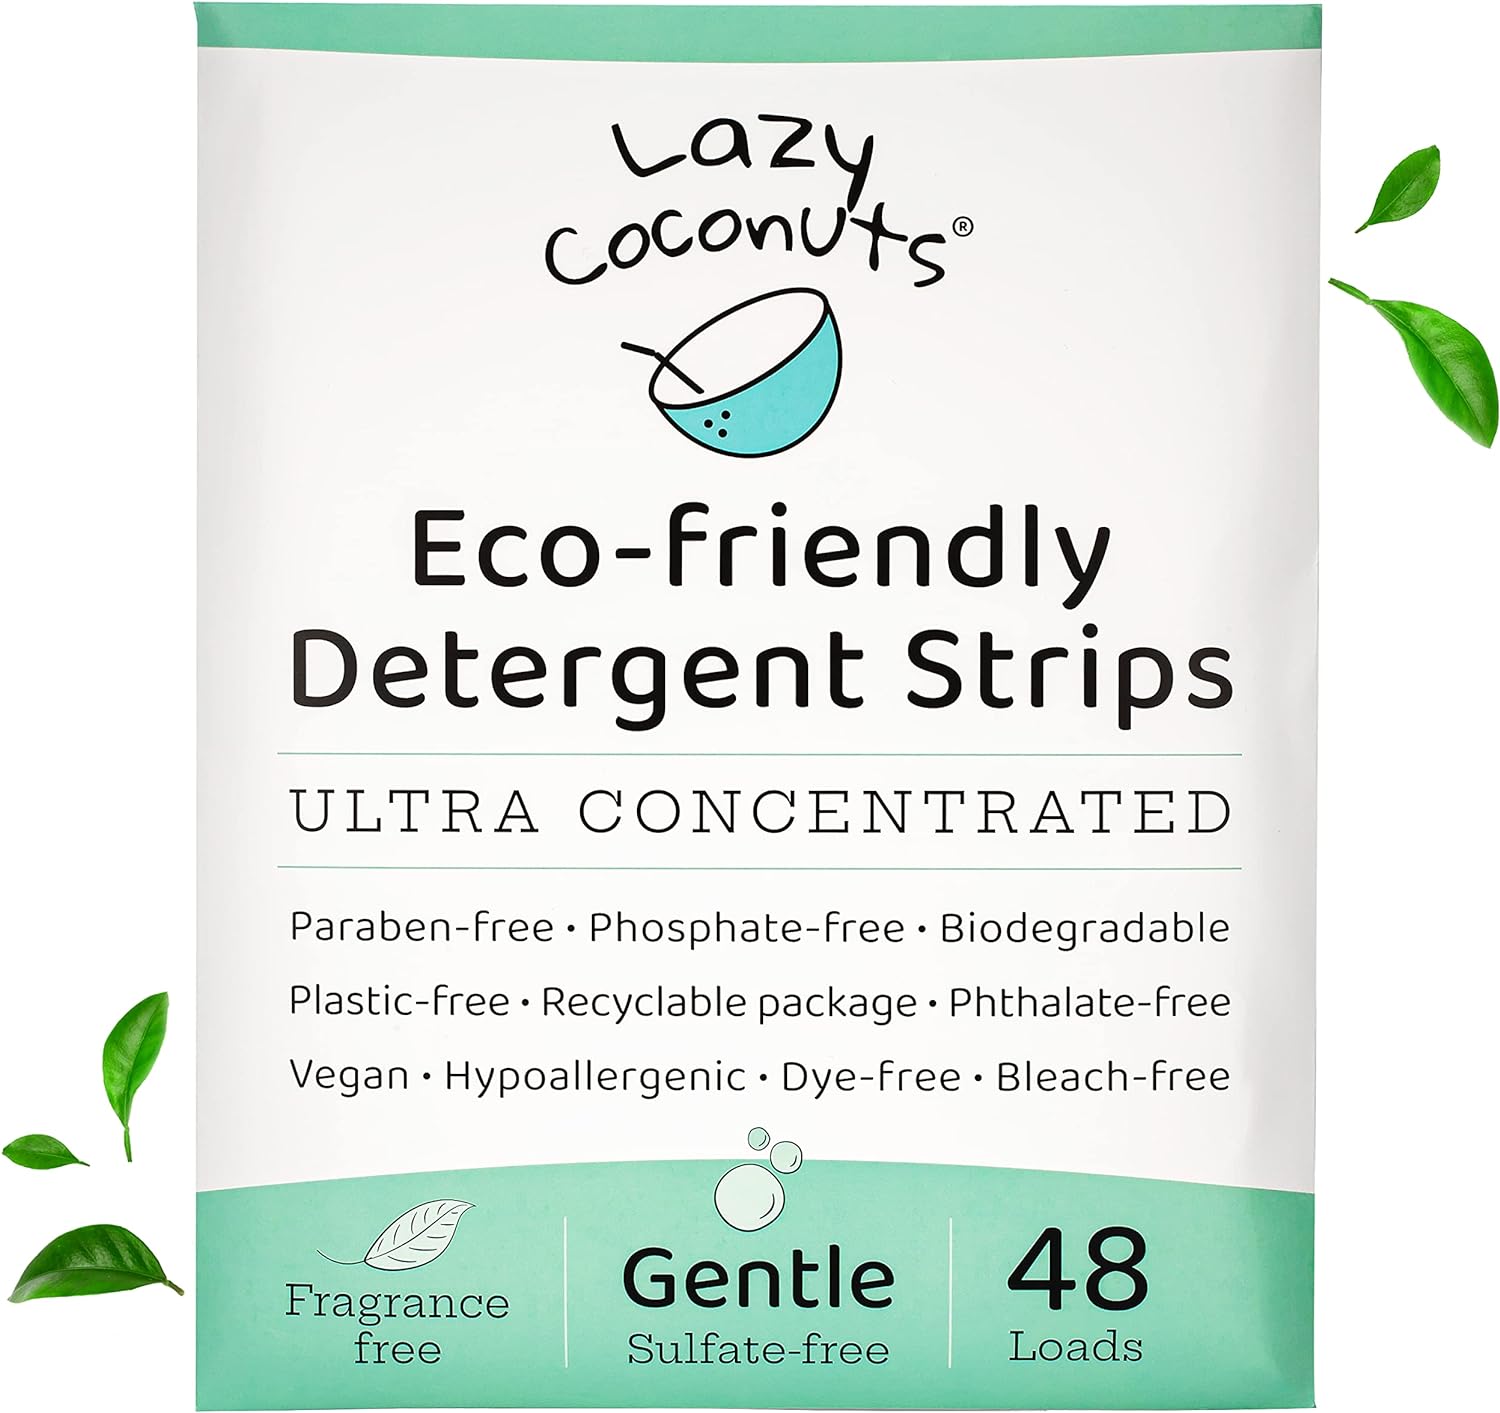 LAZY COCONUTS Laundry Detergent Sheets Review